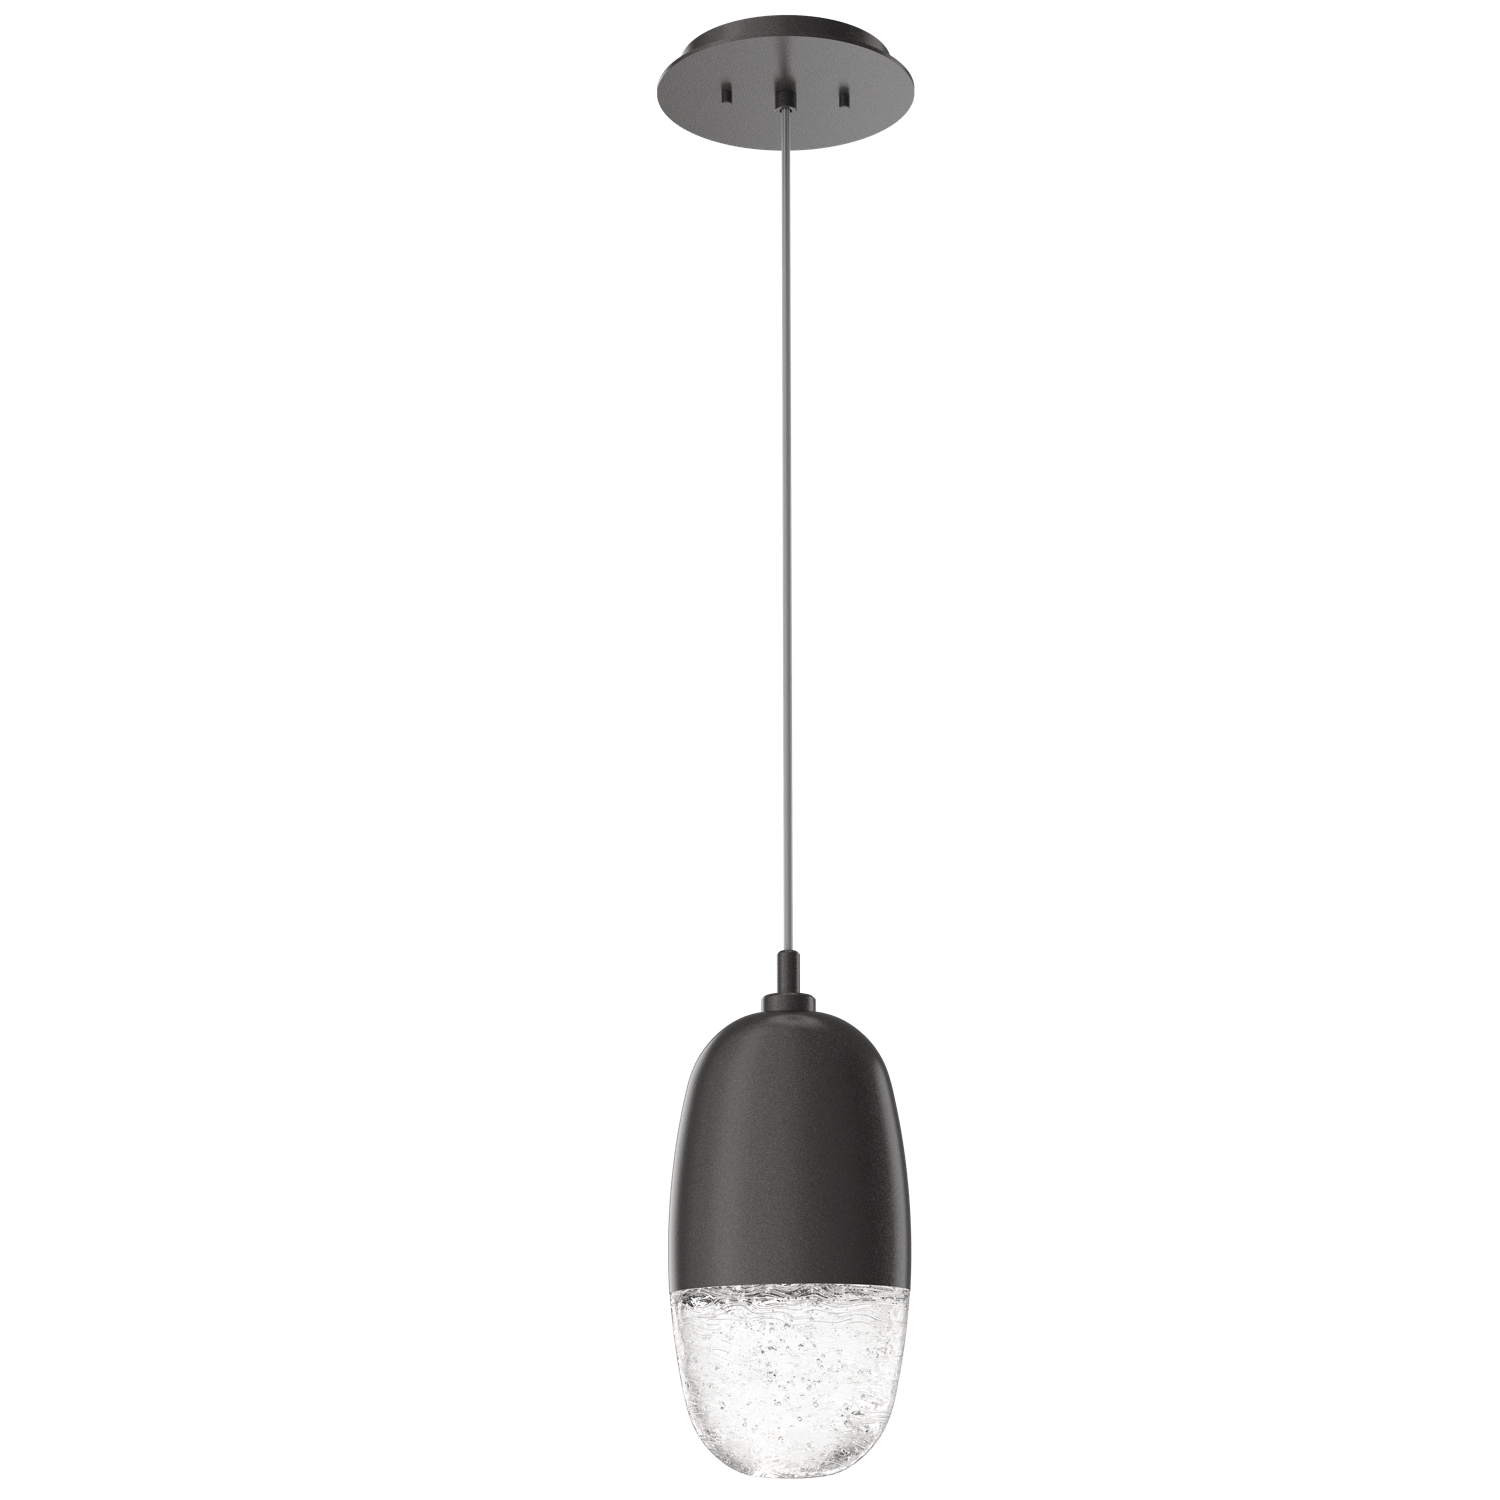 LAB0079-01-GP-Hammerton-Studio-Pebble-pendant-light-with-graphite-finish-and-clear-cast-glass-shades-and-LED-lamping